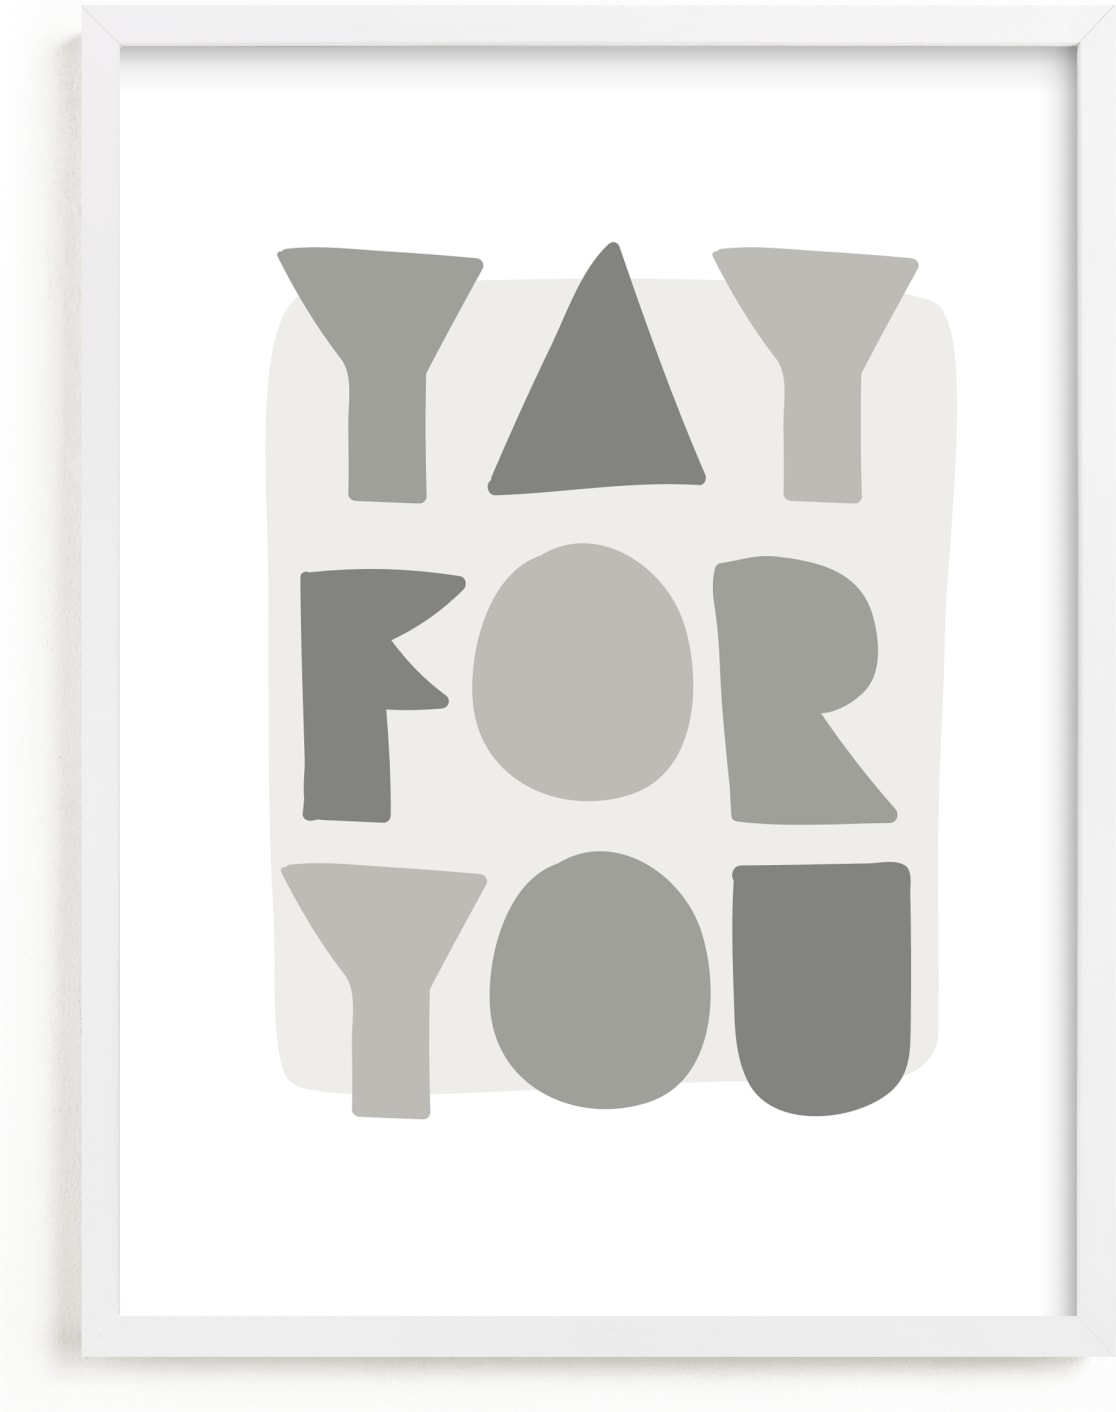 This is a grey kids wall art by Lea Delaveris called Yay for you.